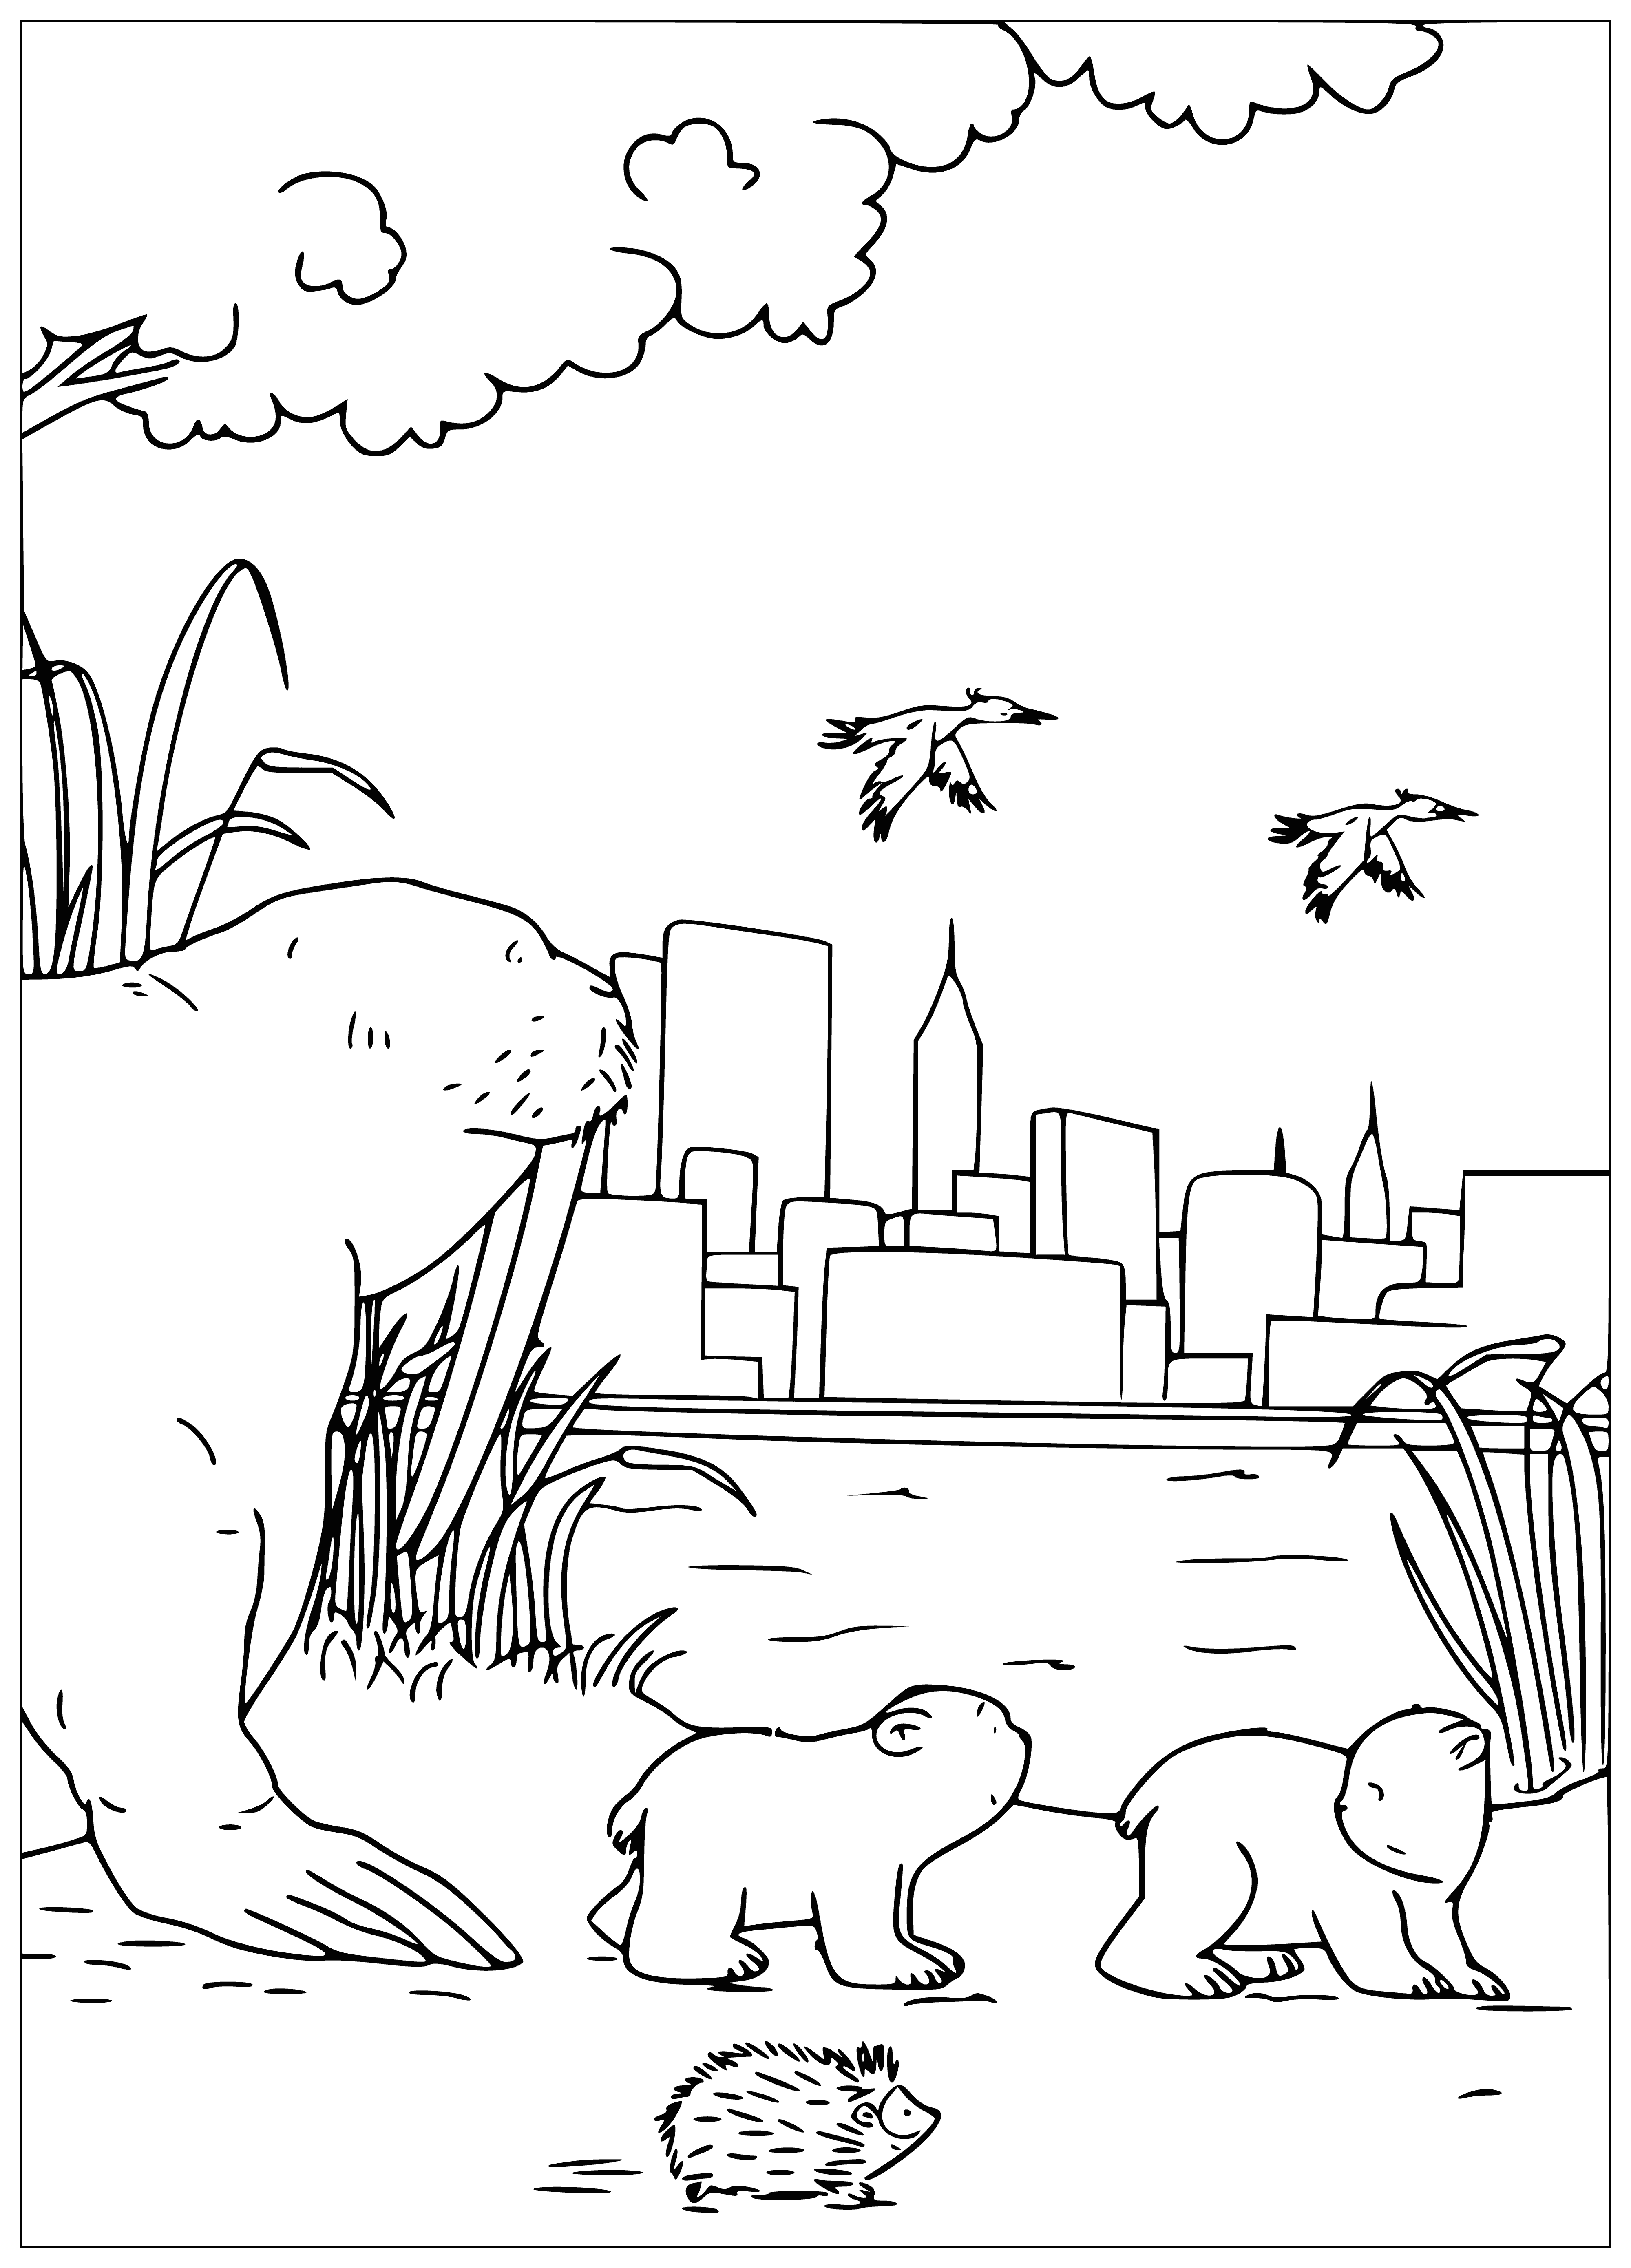 Walrus and cubs coloring page